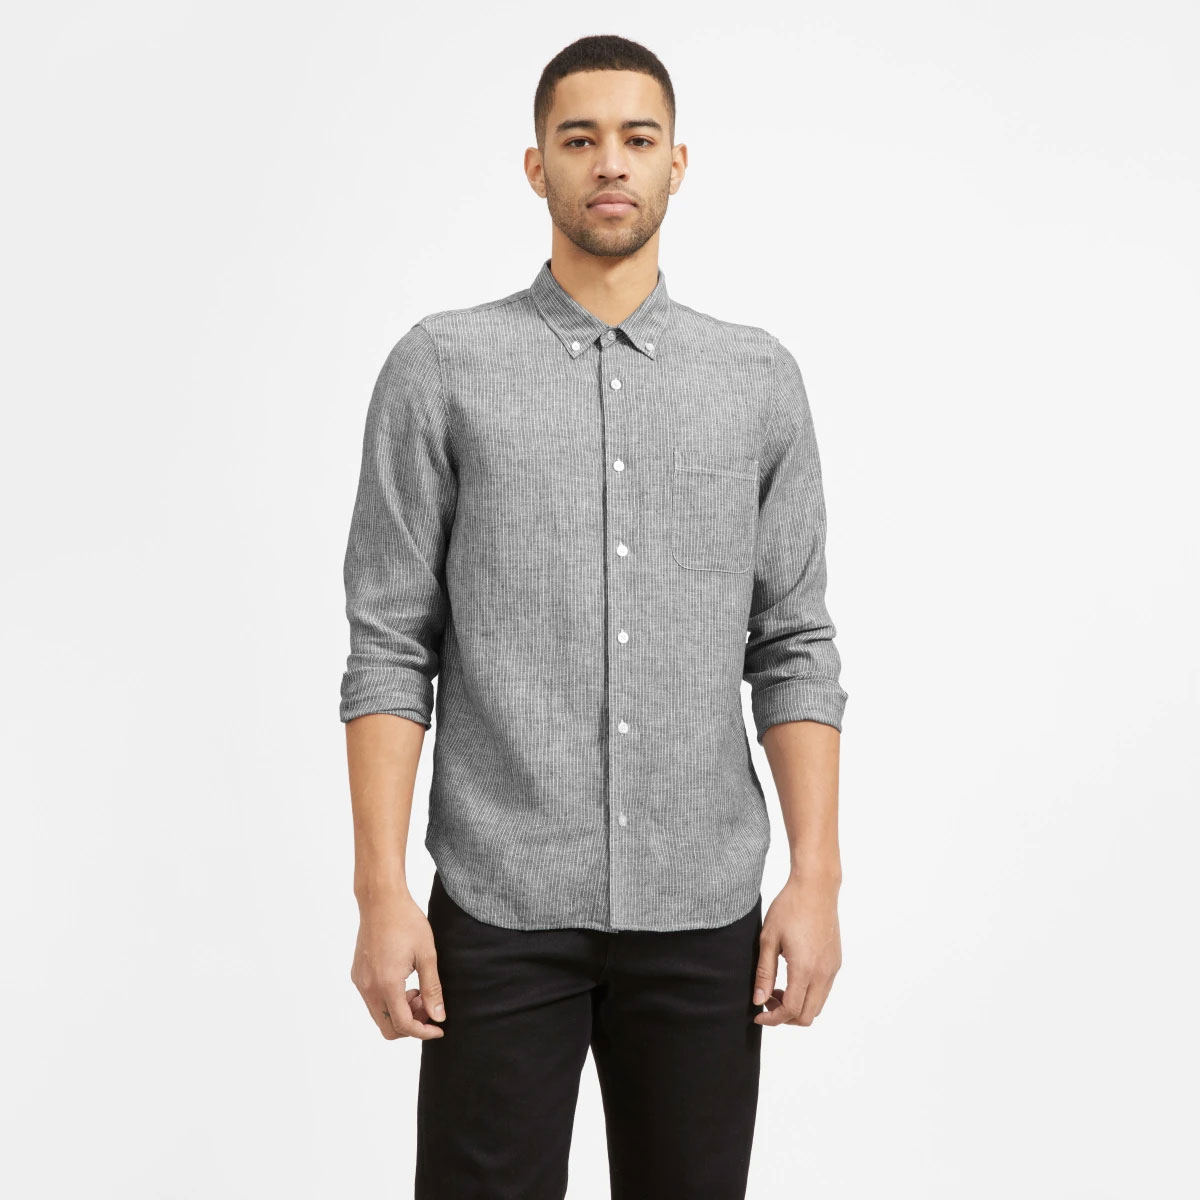 The Cotton Slim Fit Shirt – Anon